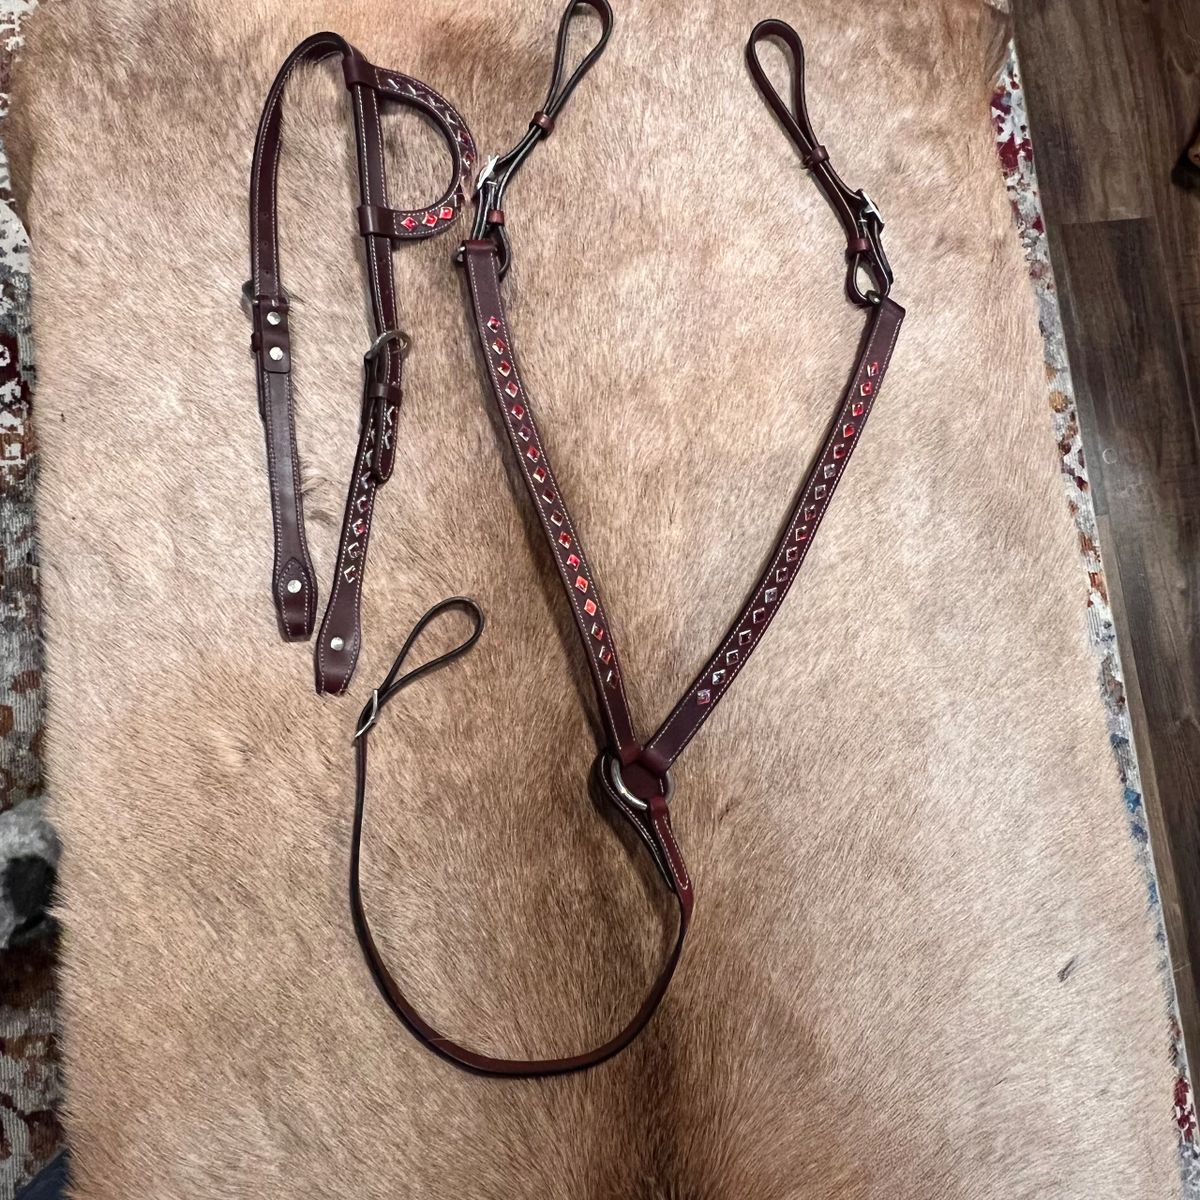 Riata Leather Tack set with Headstall and Breast Collar with Red Diamond  Design